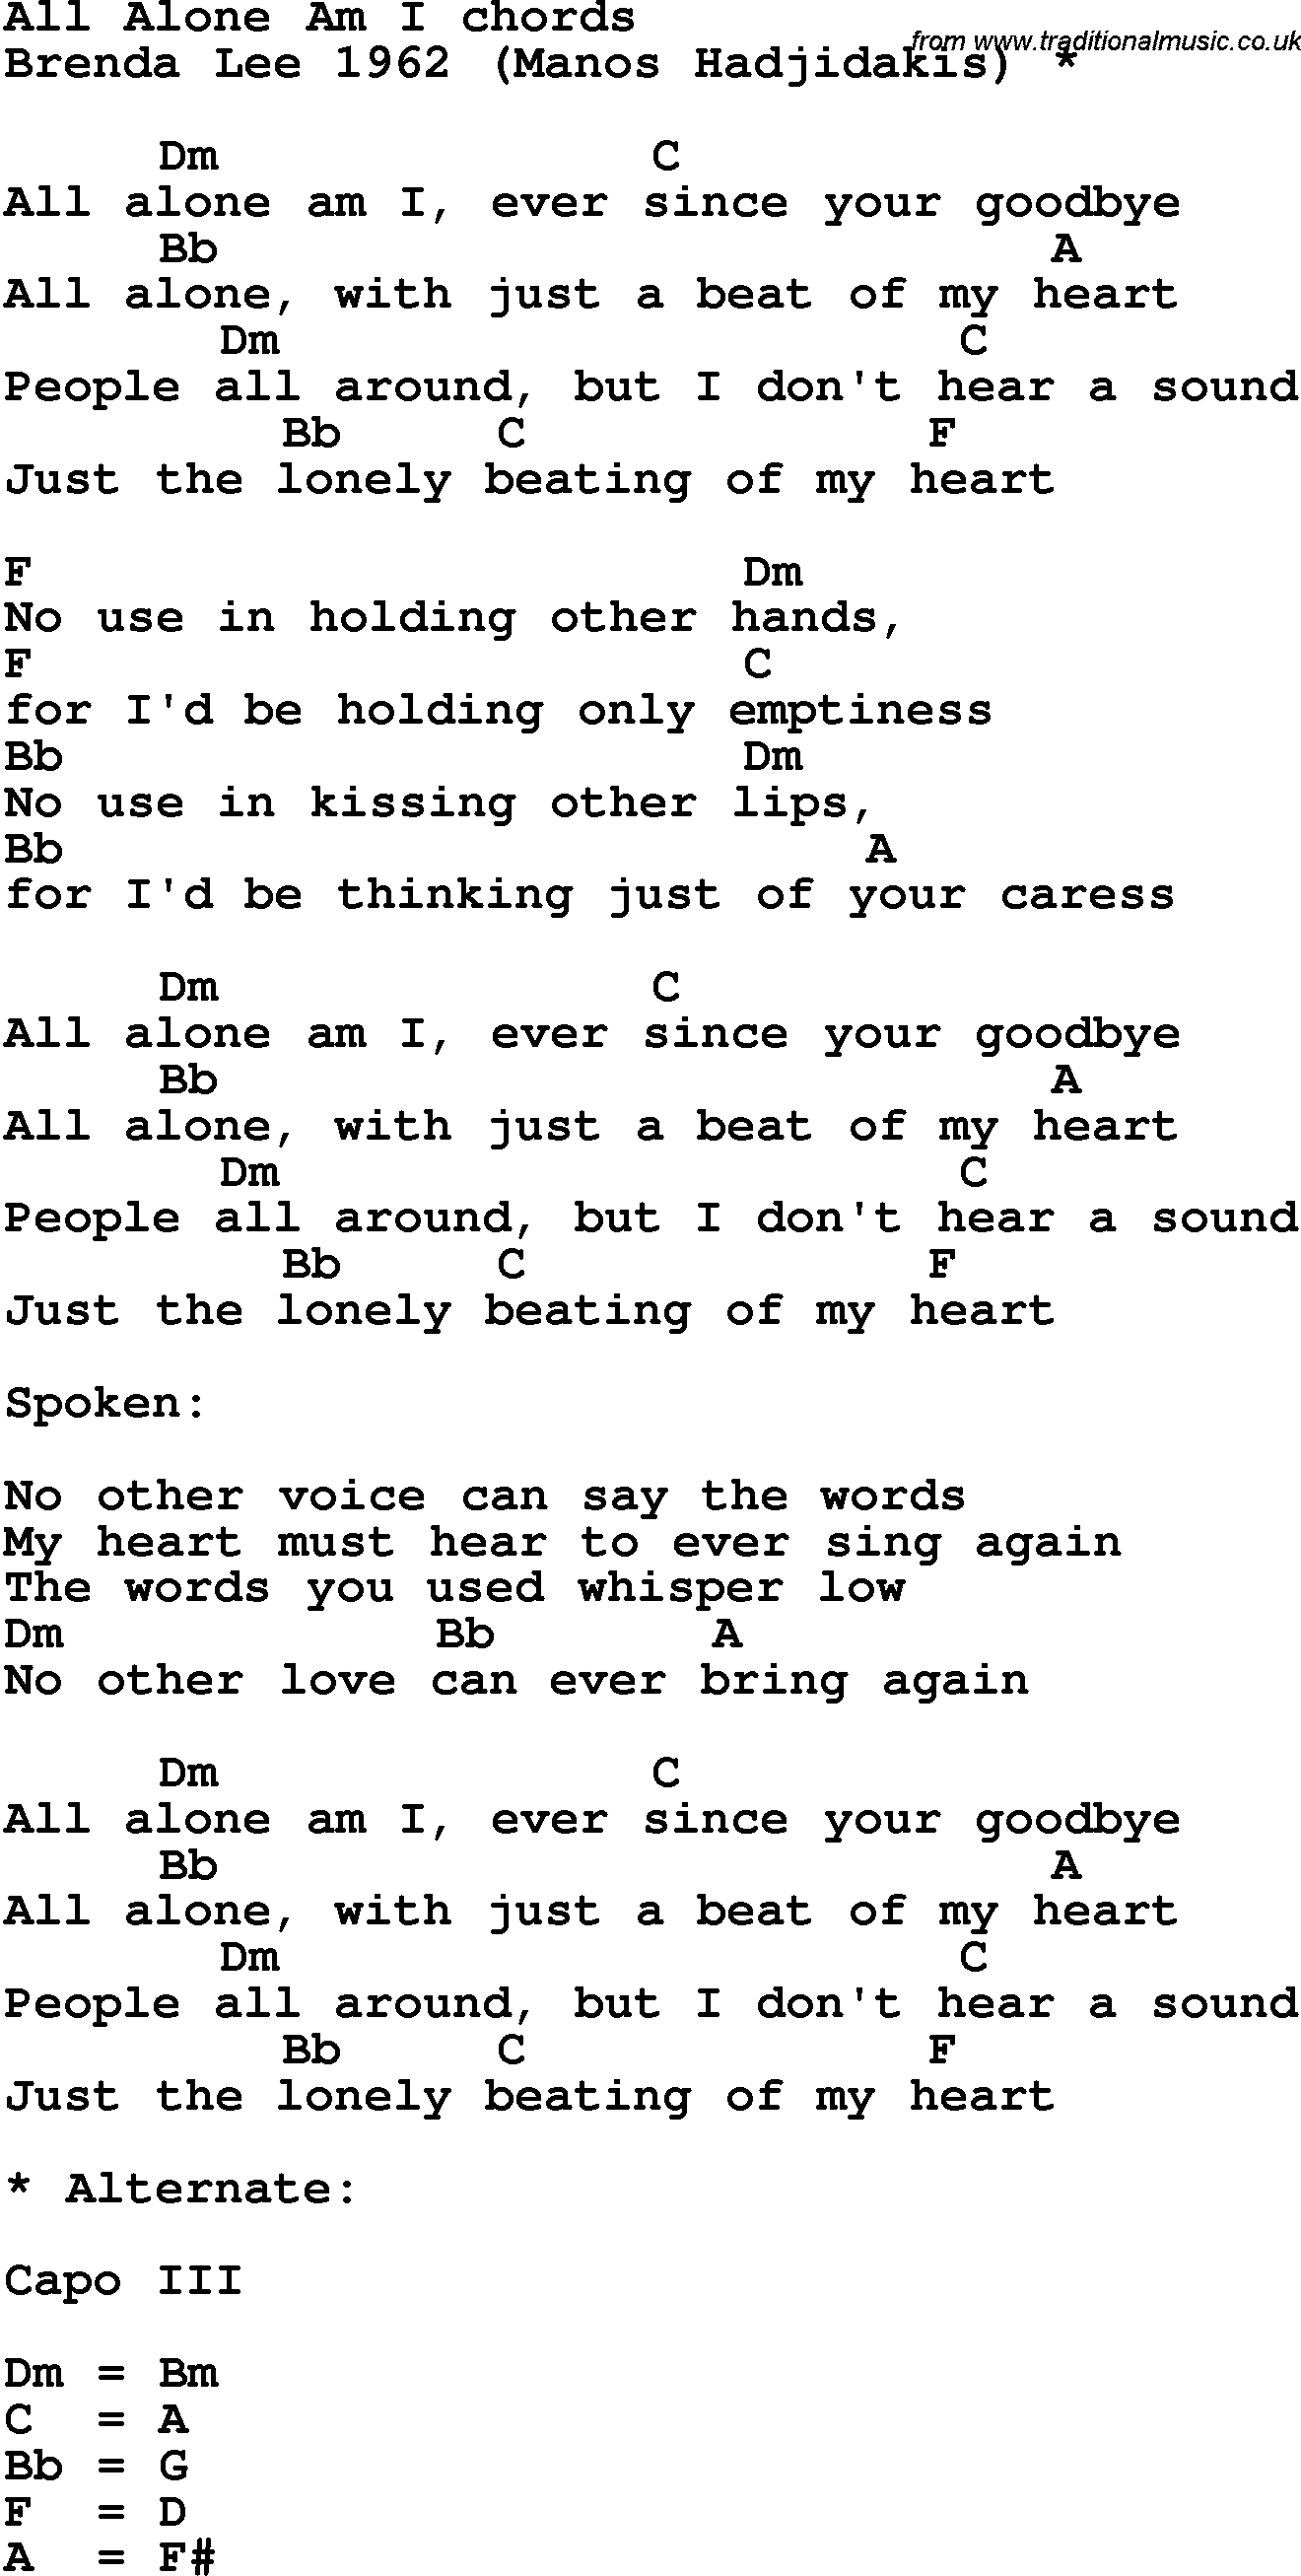 Song Lyrics with guitar chords for All Alone Am I